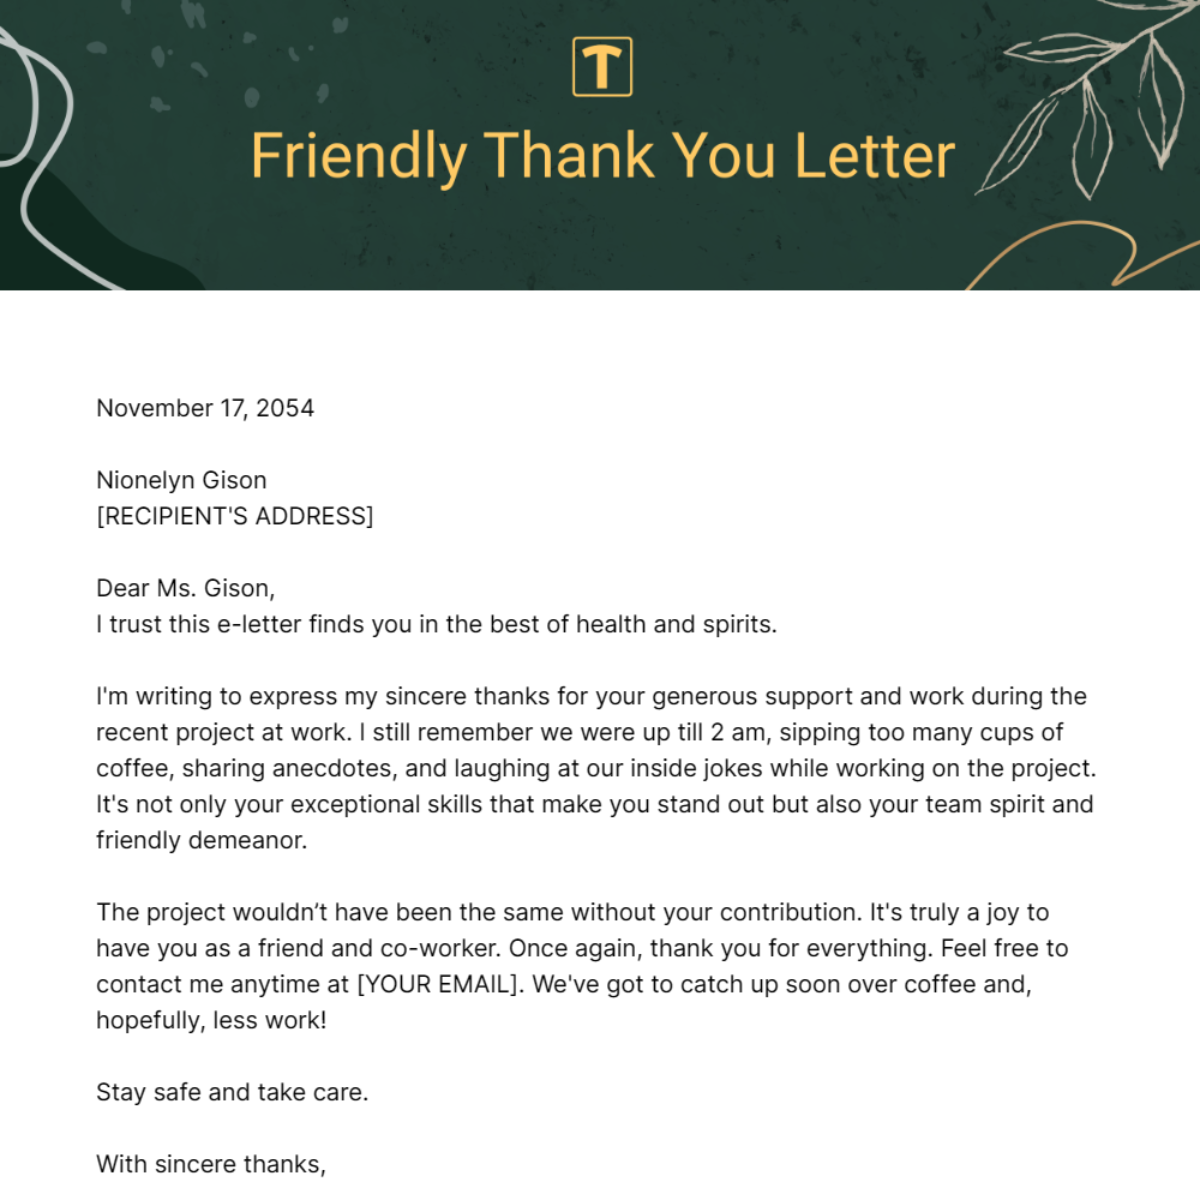 Friendly Thank You Letter Template